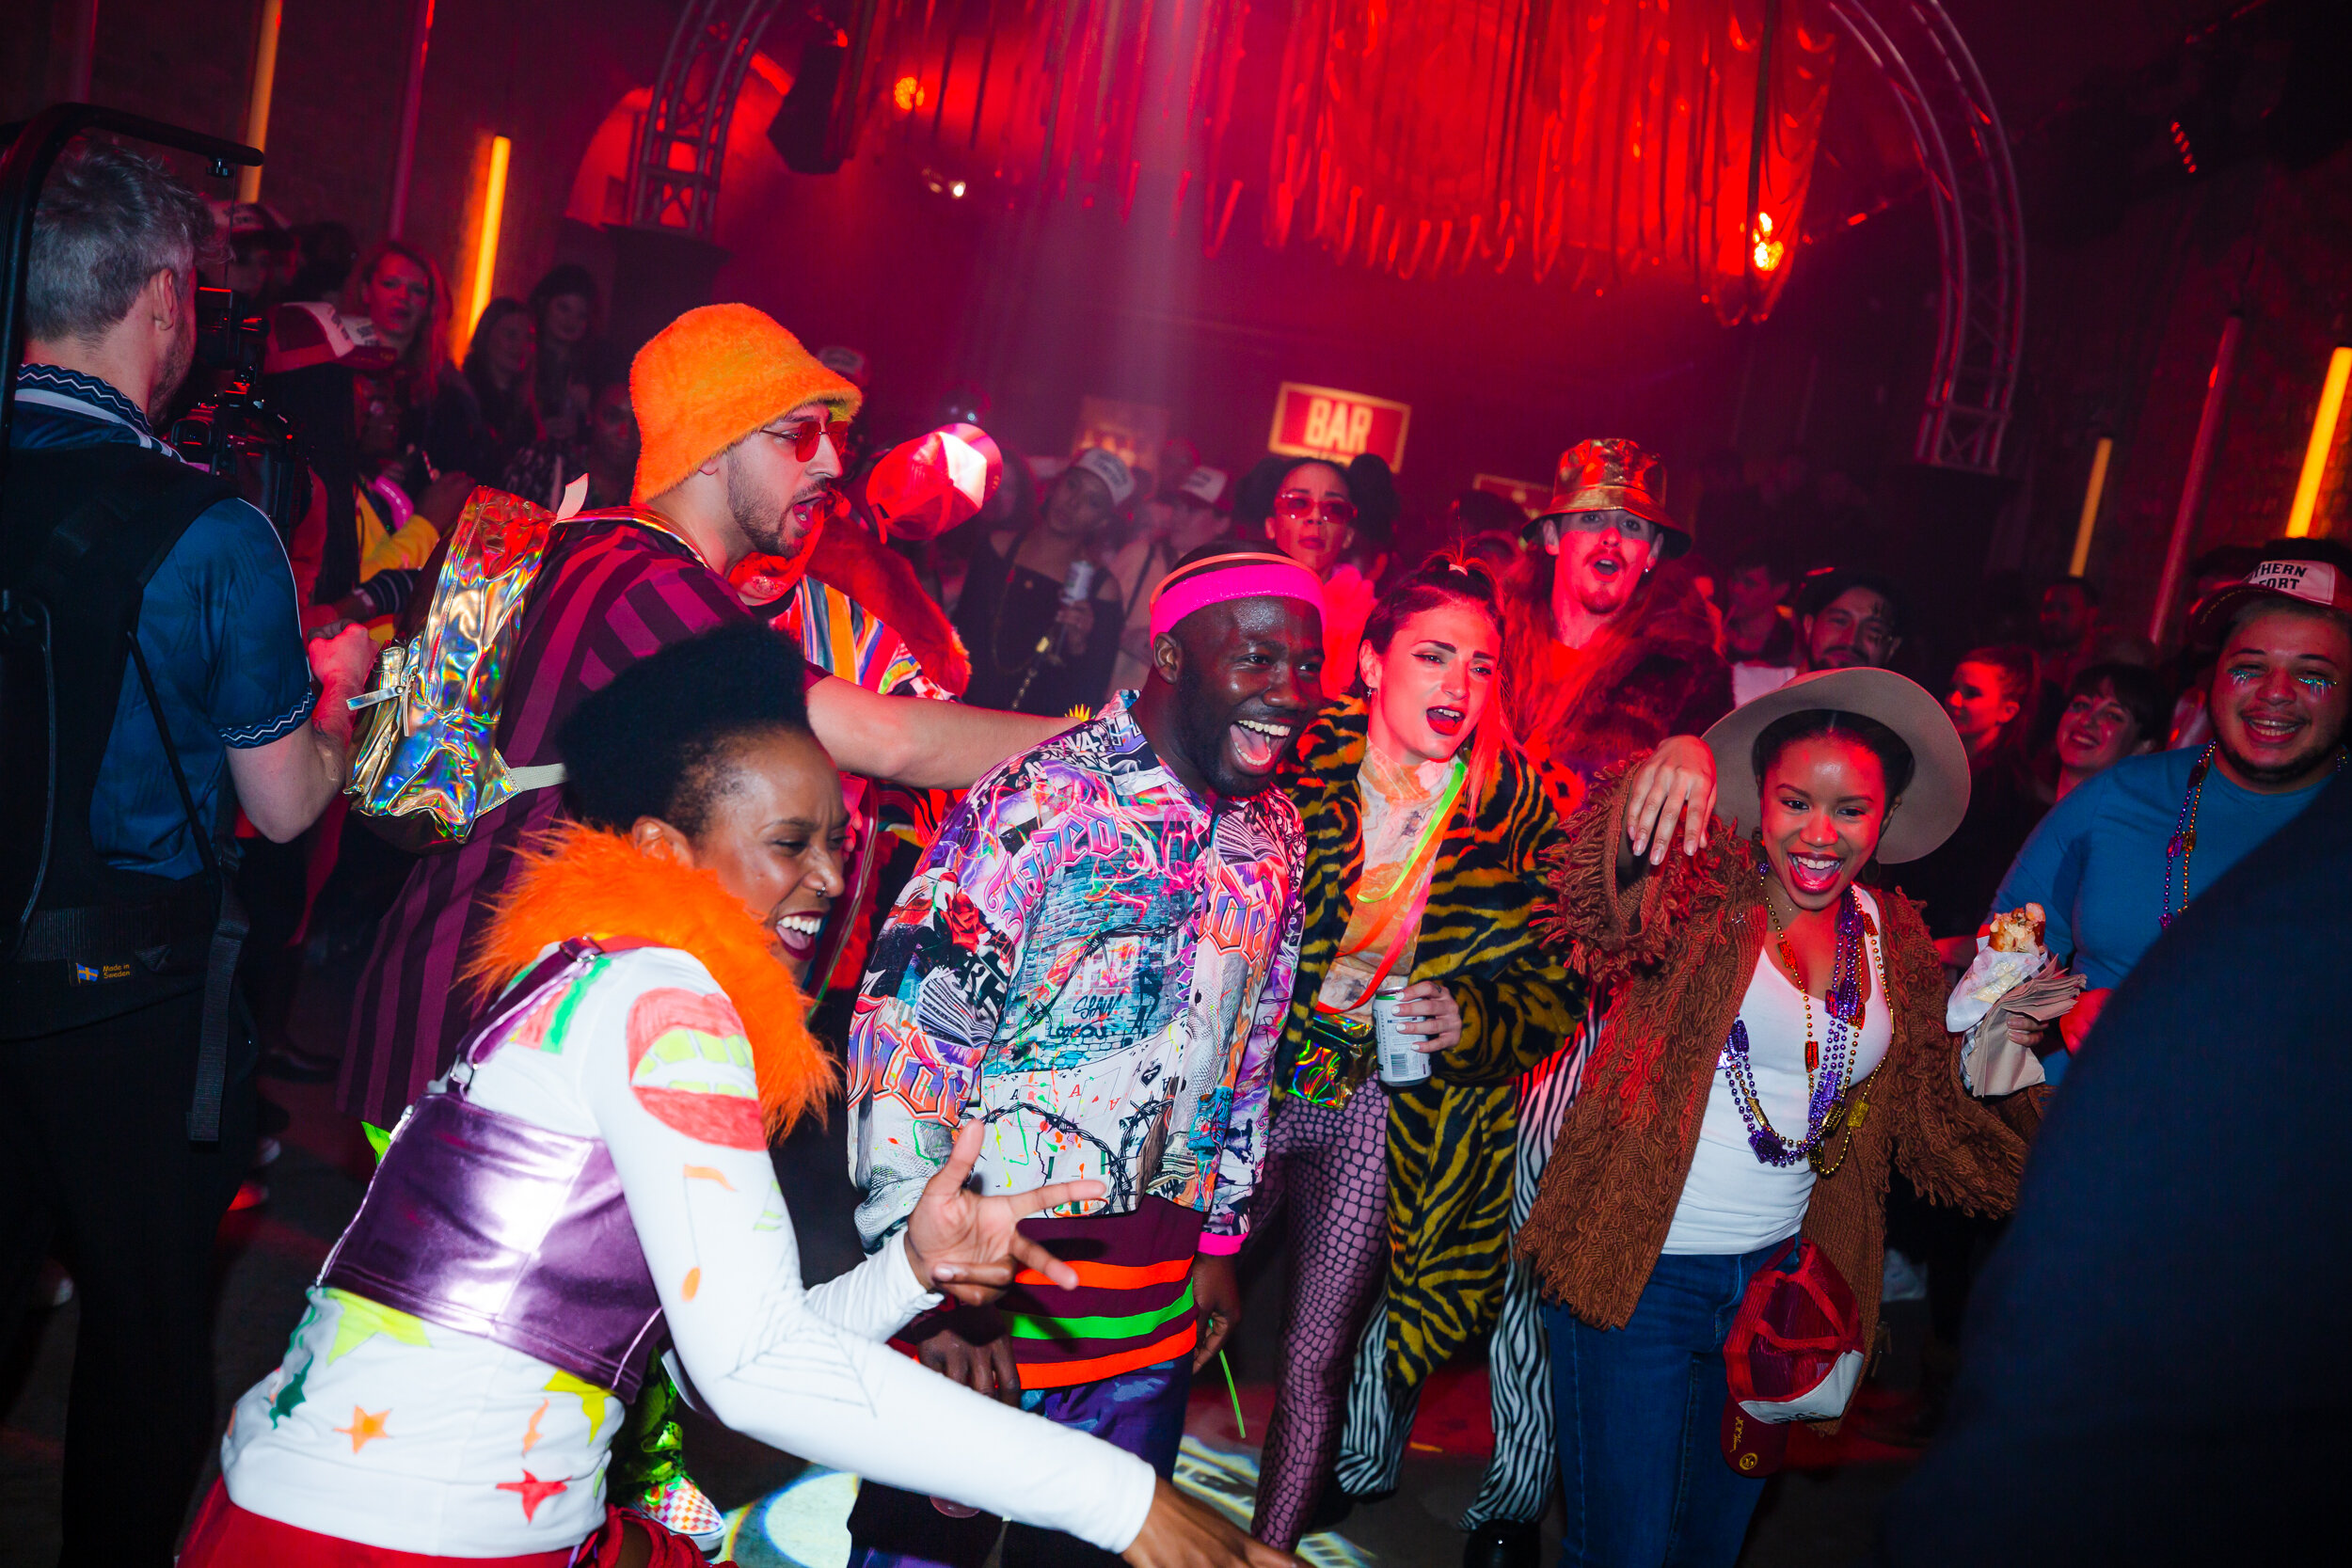  Friends raving together all dressed in a sea of fluro dancing and encourage others to get on the dance floor 